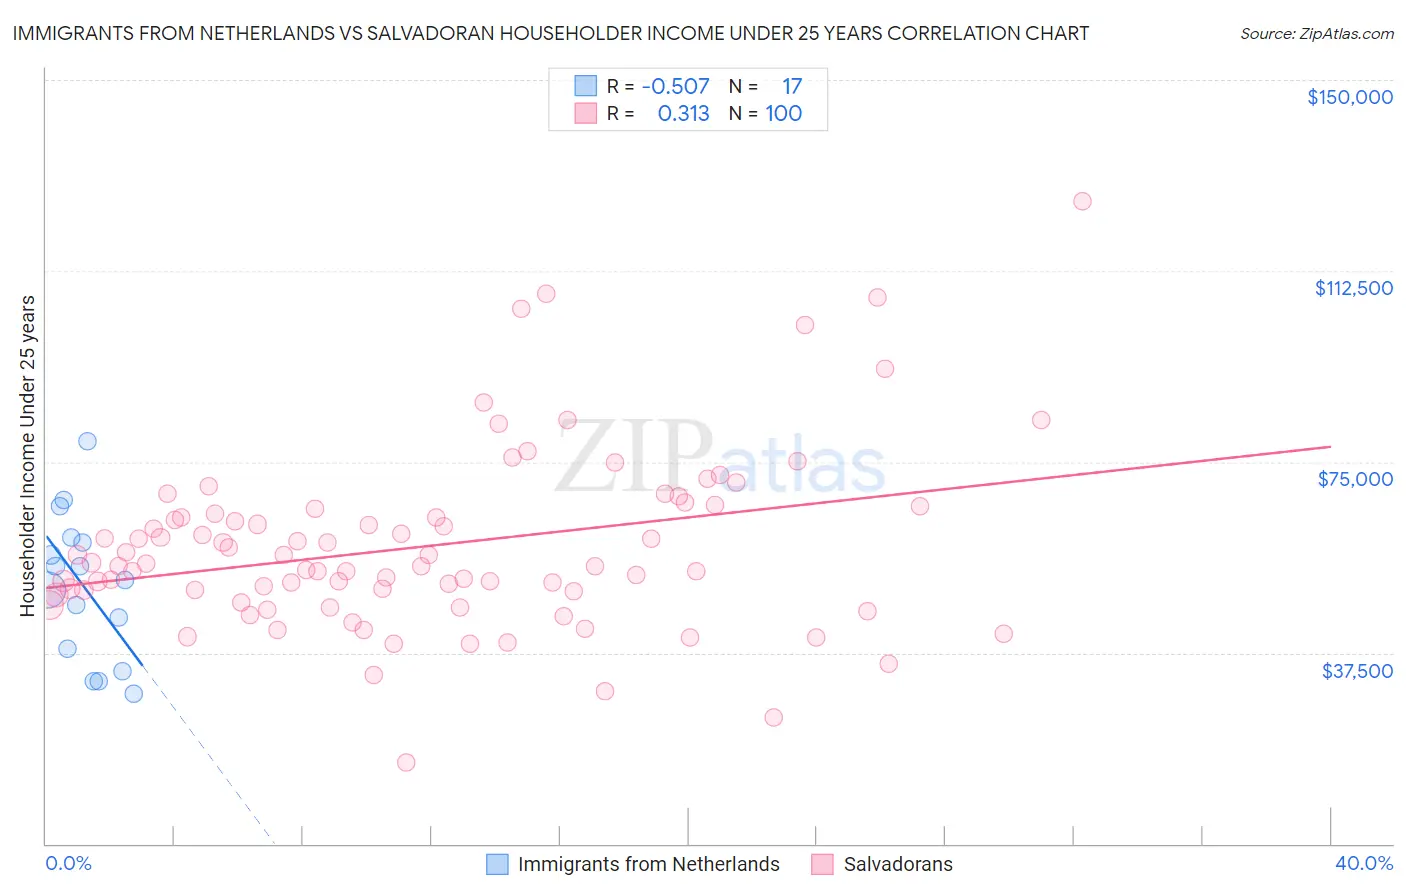 Immigrants from Netherlands vs Salvadoran Householder Income Under 25 years